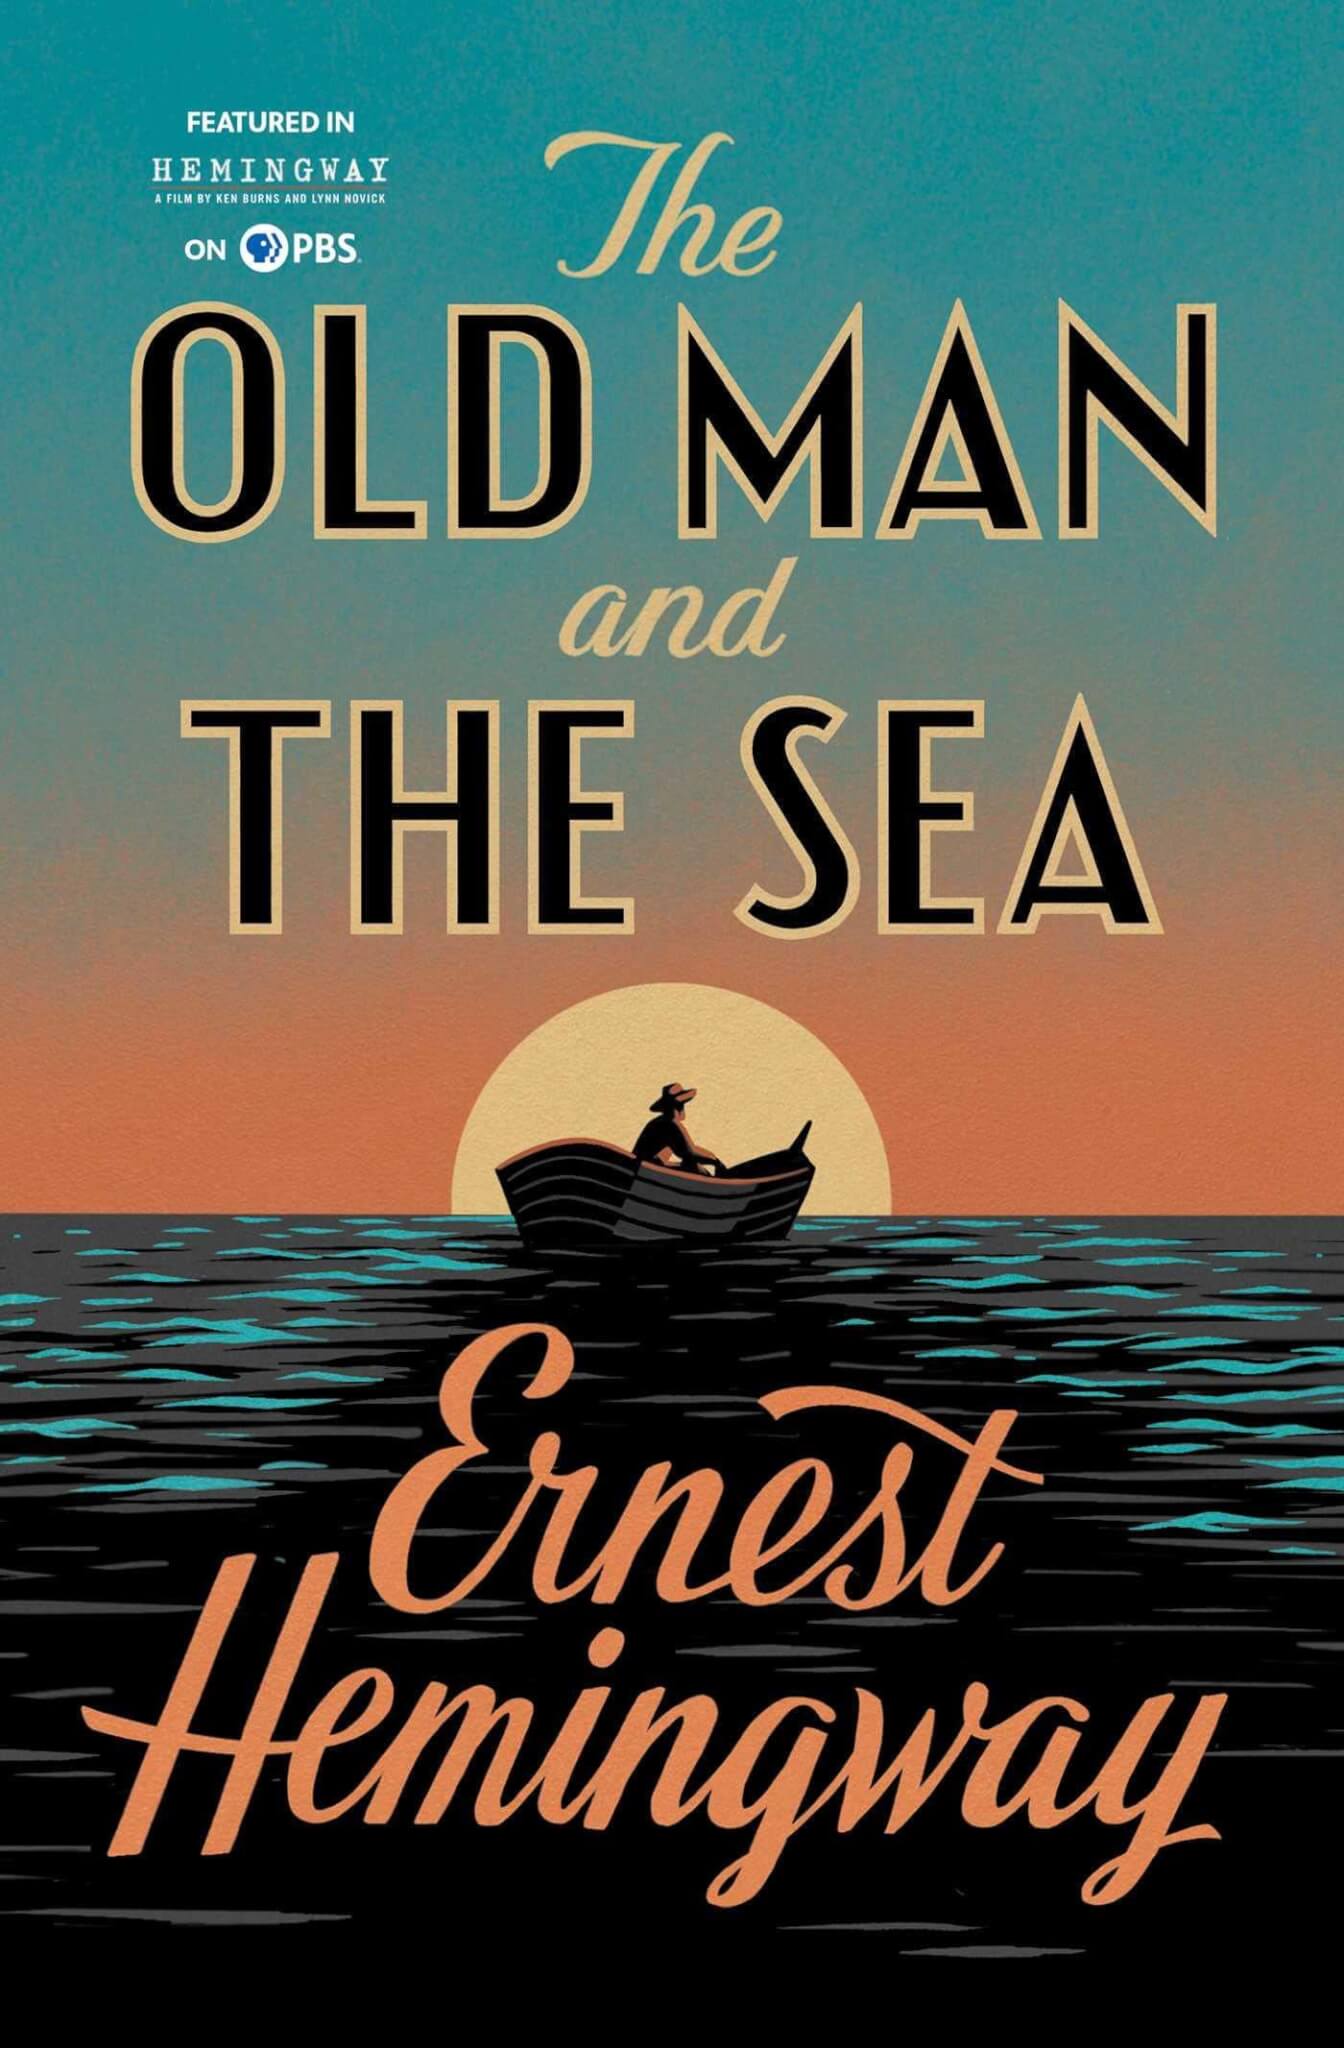 "The Old Man and the Sea" (1952)